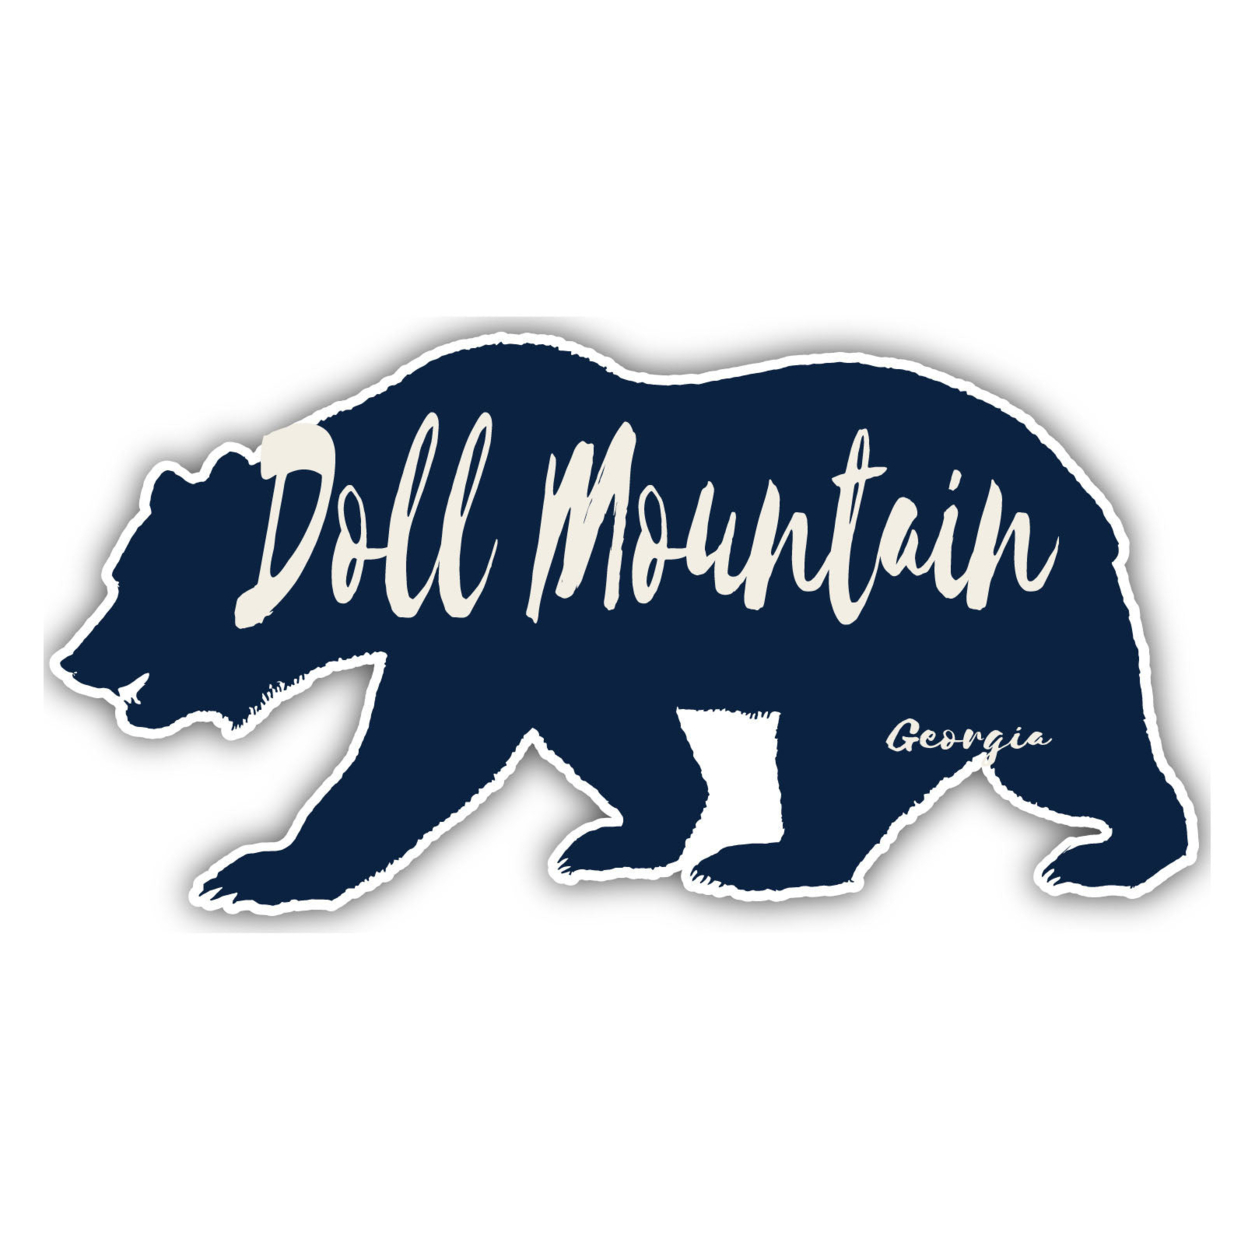 Doll Mountain Georgia Souvenir Decorative Stickers (Choose Theme And Size) - 4-Pack, 6-Inch, Bear